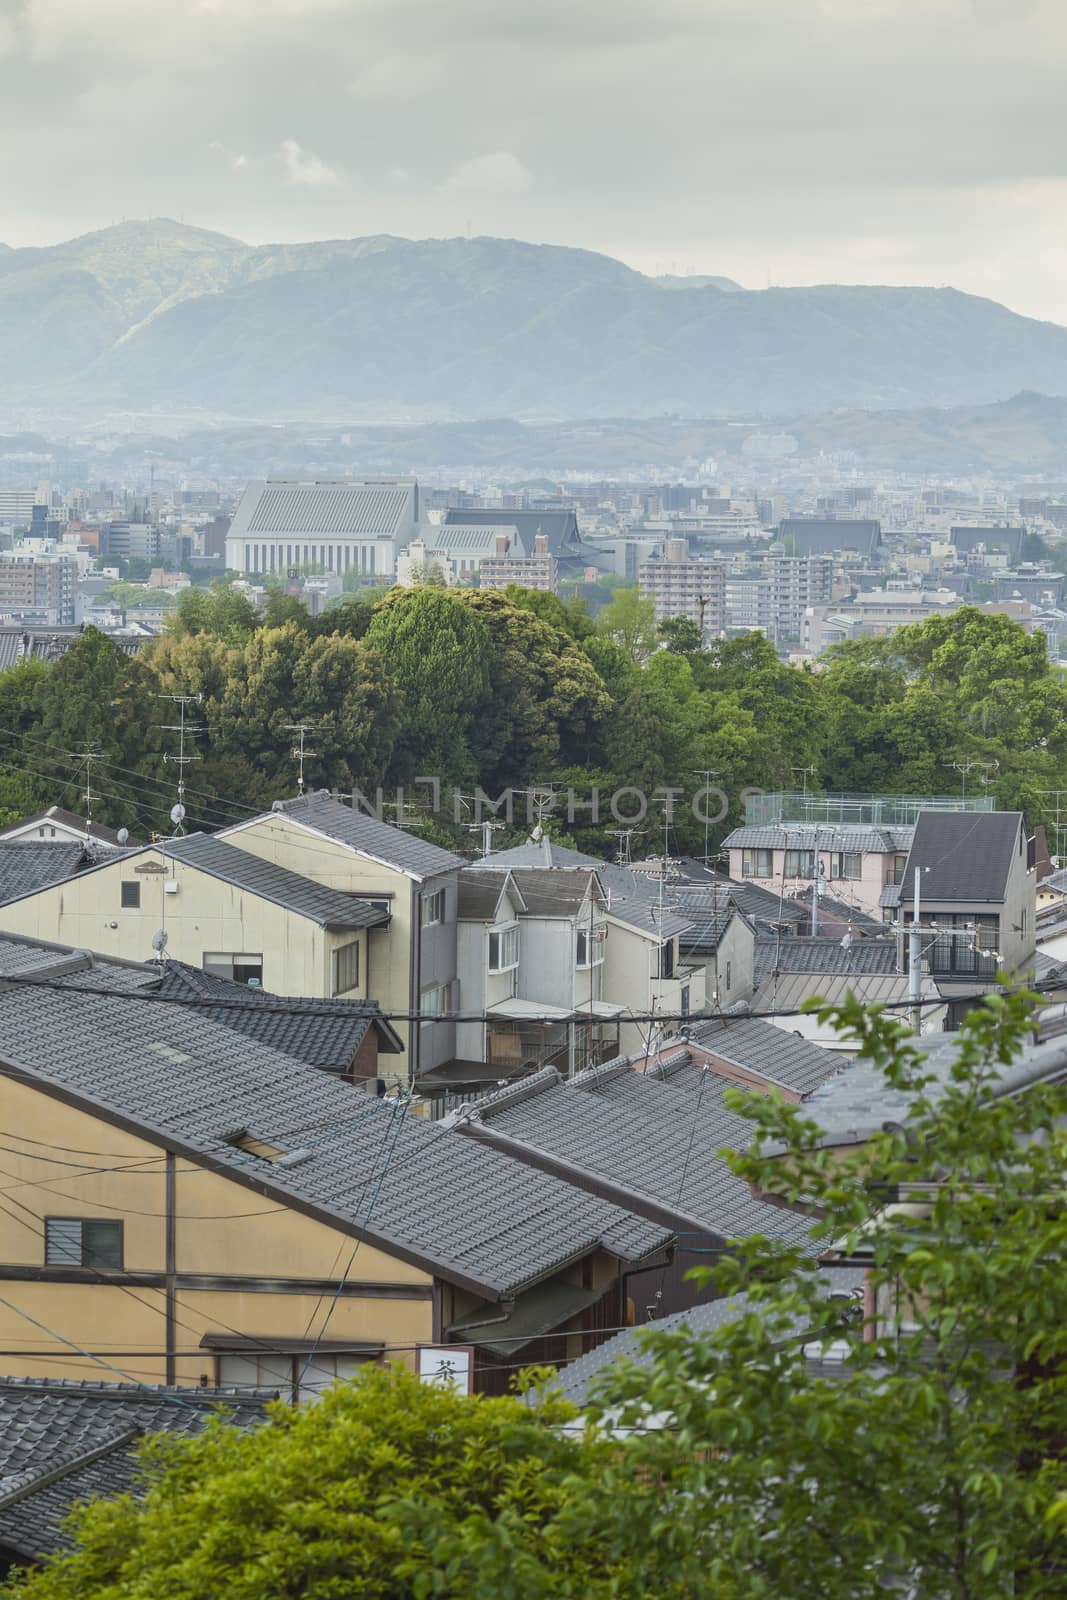 Evening view of Kyoto city in Japan.

